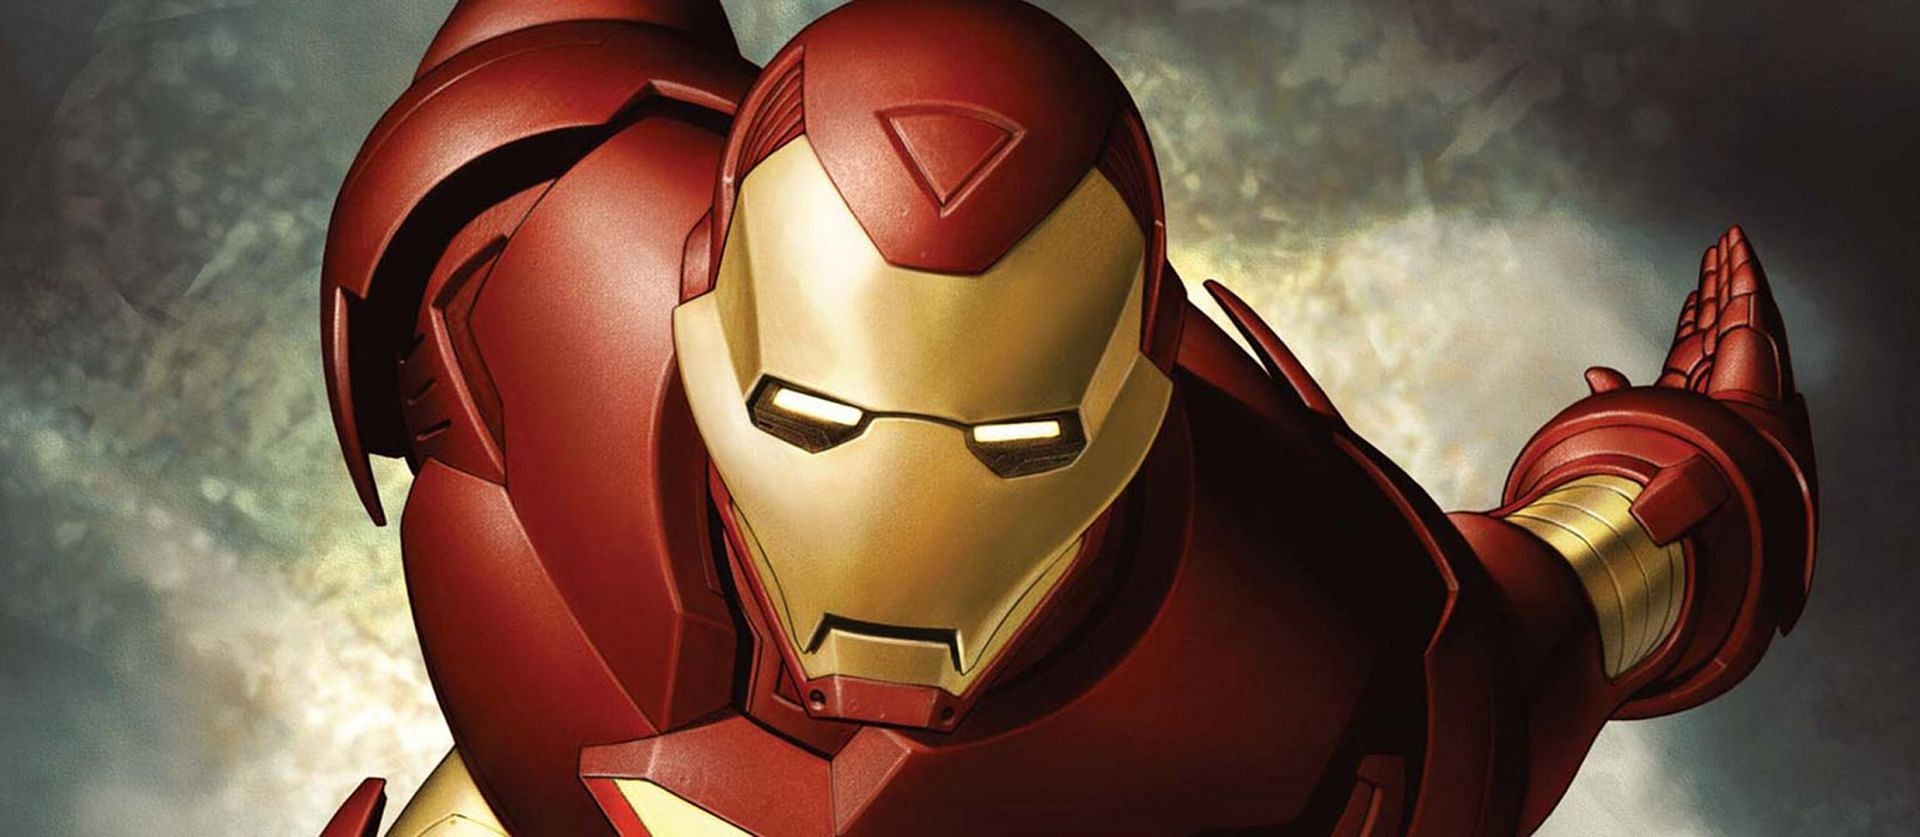 Iron Man: Extremis, written by Warren Ellis and illustrated by Adi Granov (Image via Marvel)